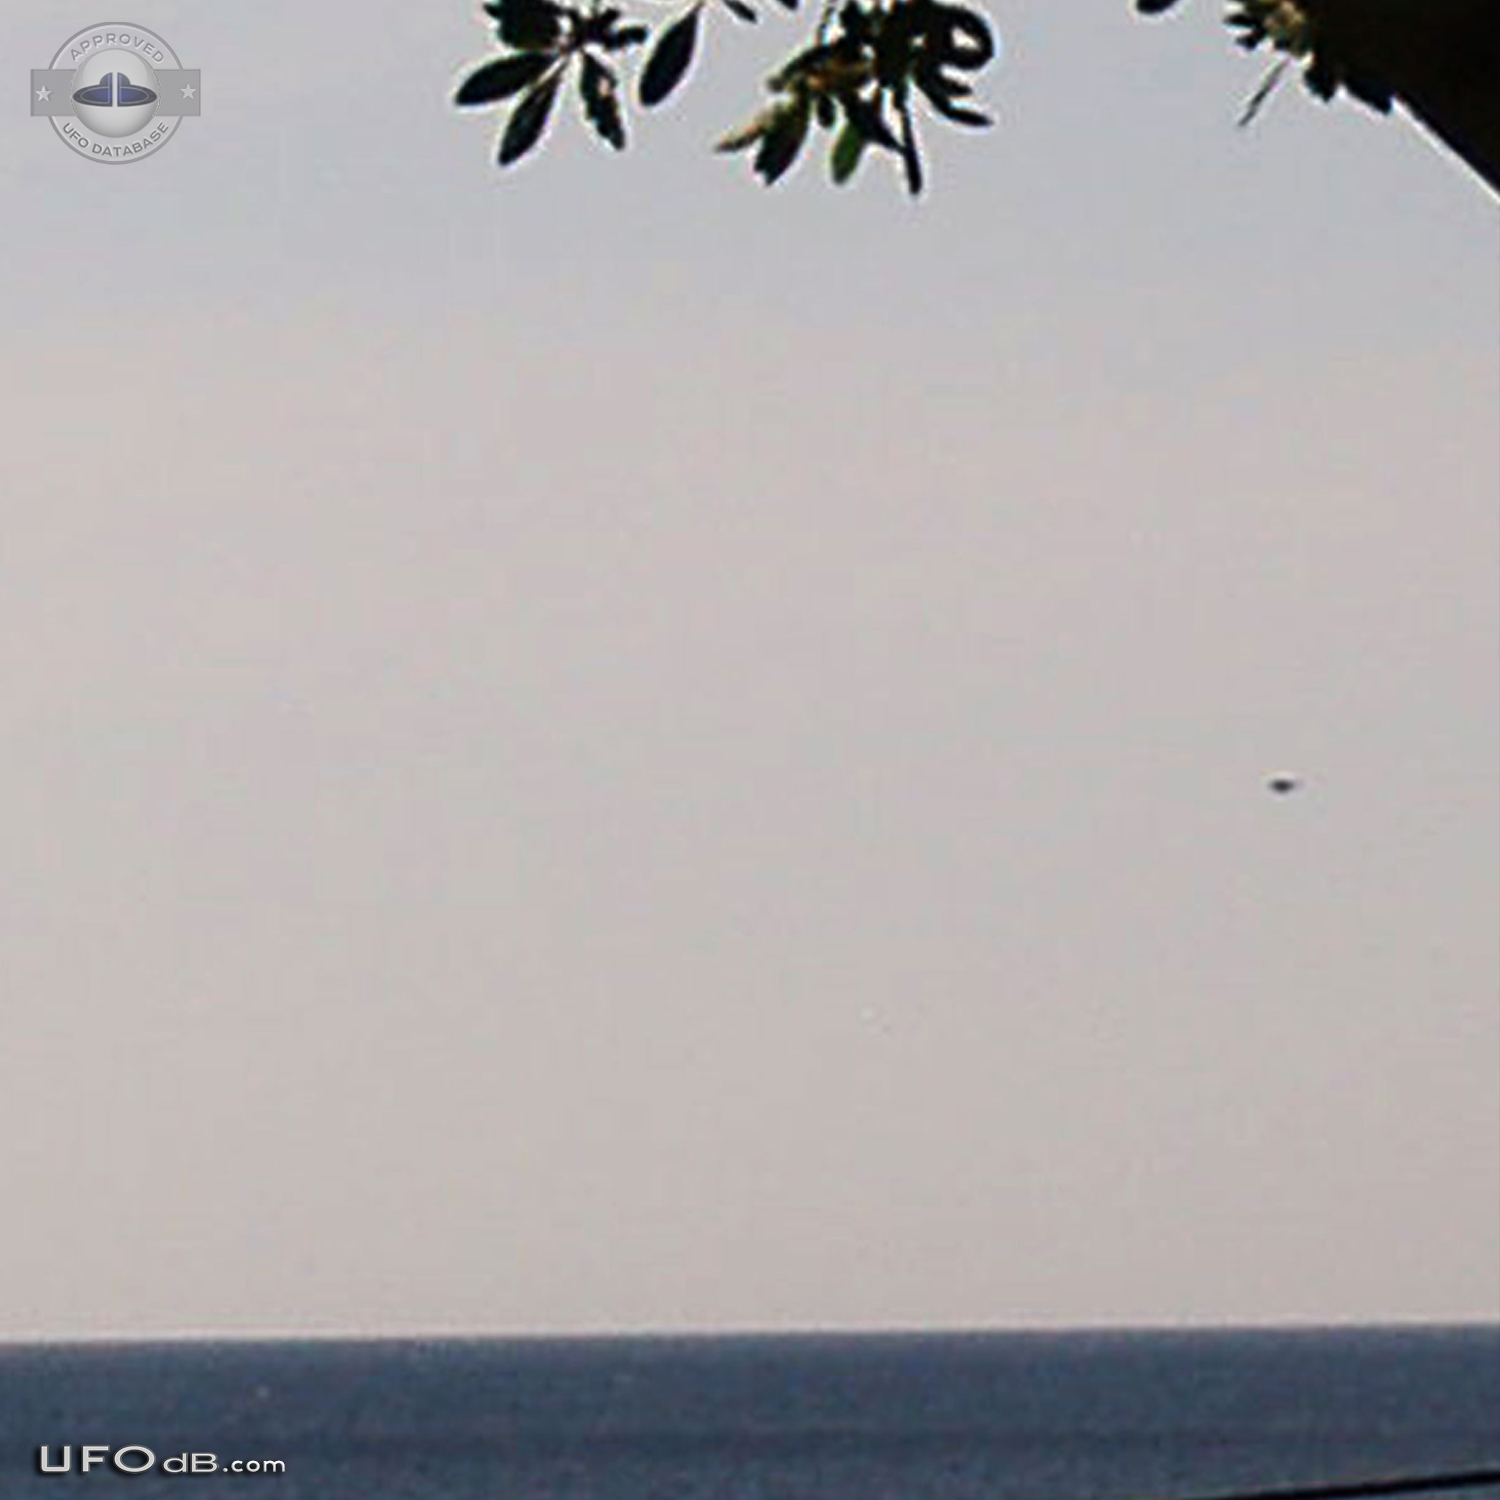 Professional photographer get UFOs over the sea in Negril Jamaica 2007 UFO Picture #466-2